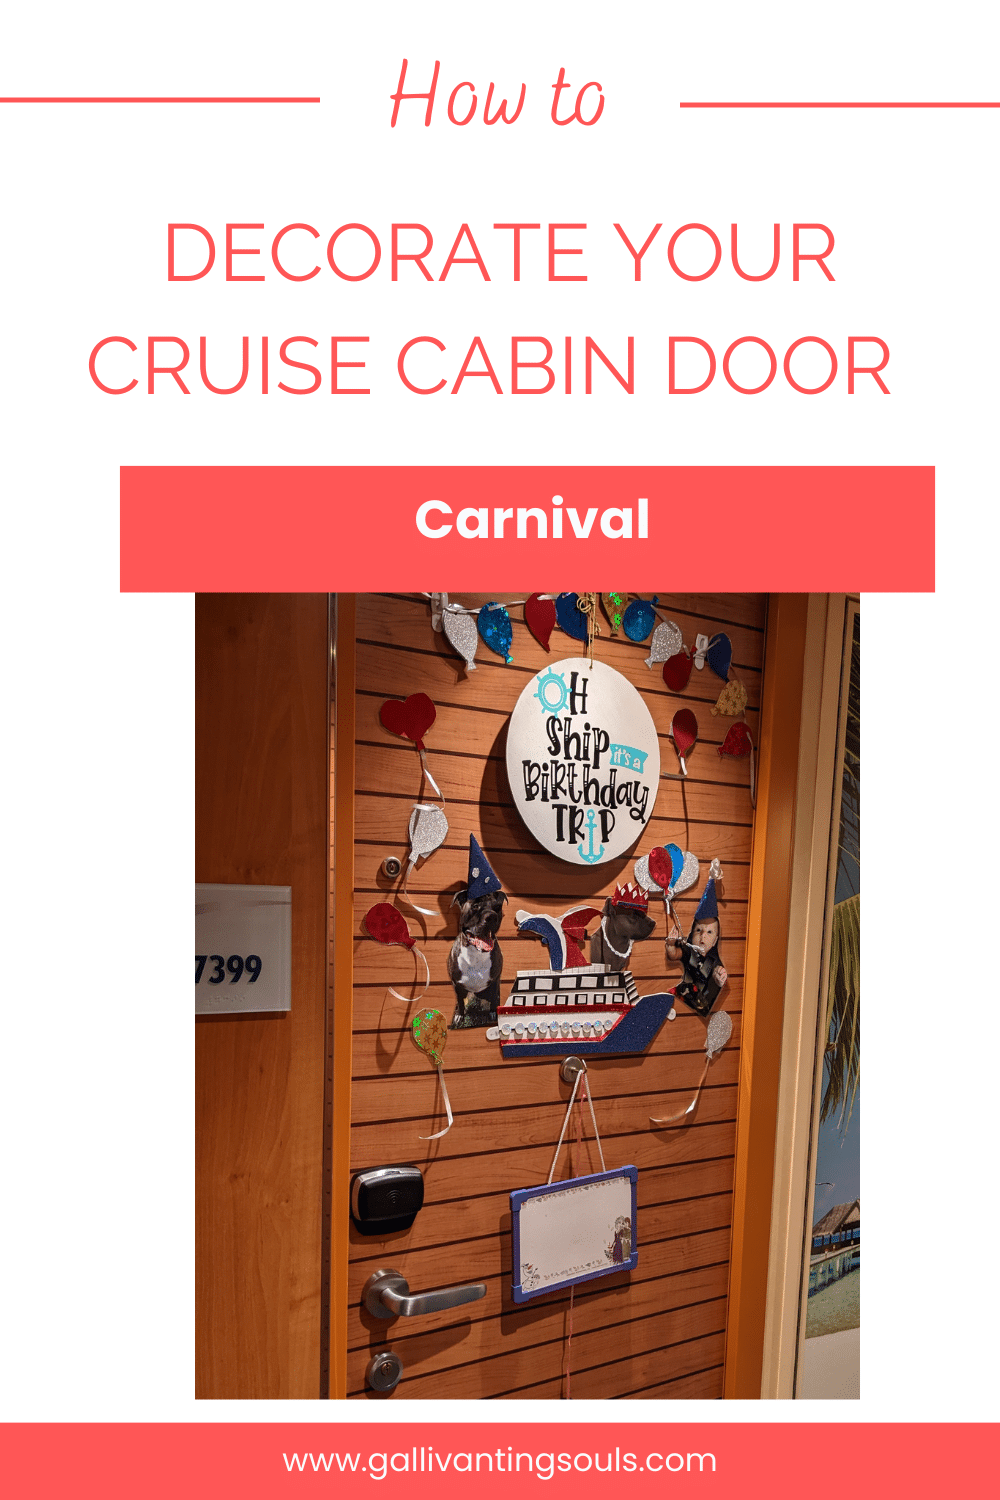 Decorating your cruise cabin door for your birthday can make an extra special day.